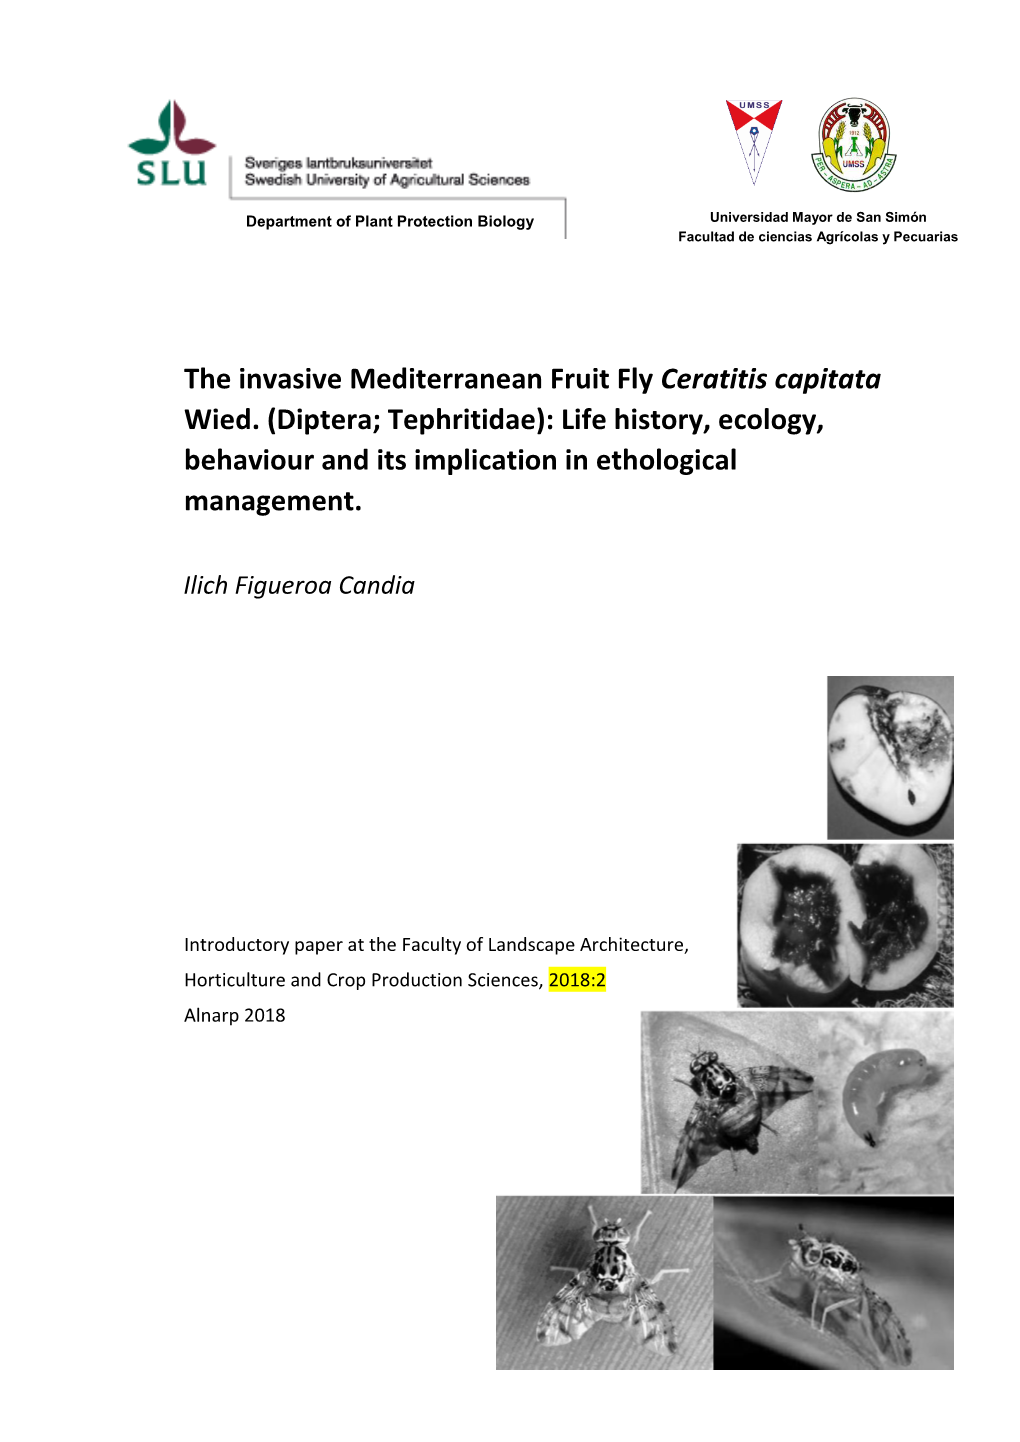 The Invasive Mediterranean Fruit Fly Ceratitis Capitata Wied. (Diptera; Tephritidae): Life History, Ecology, Behaviour and Its Implication in Ethological Management